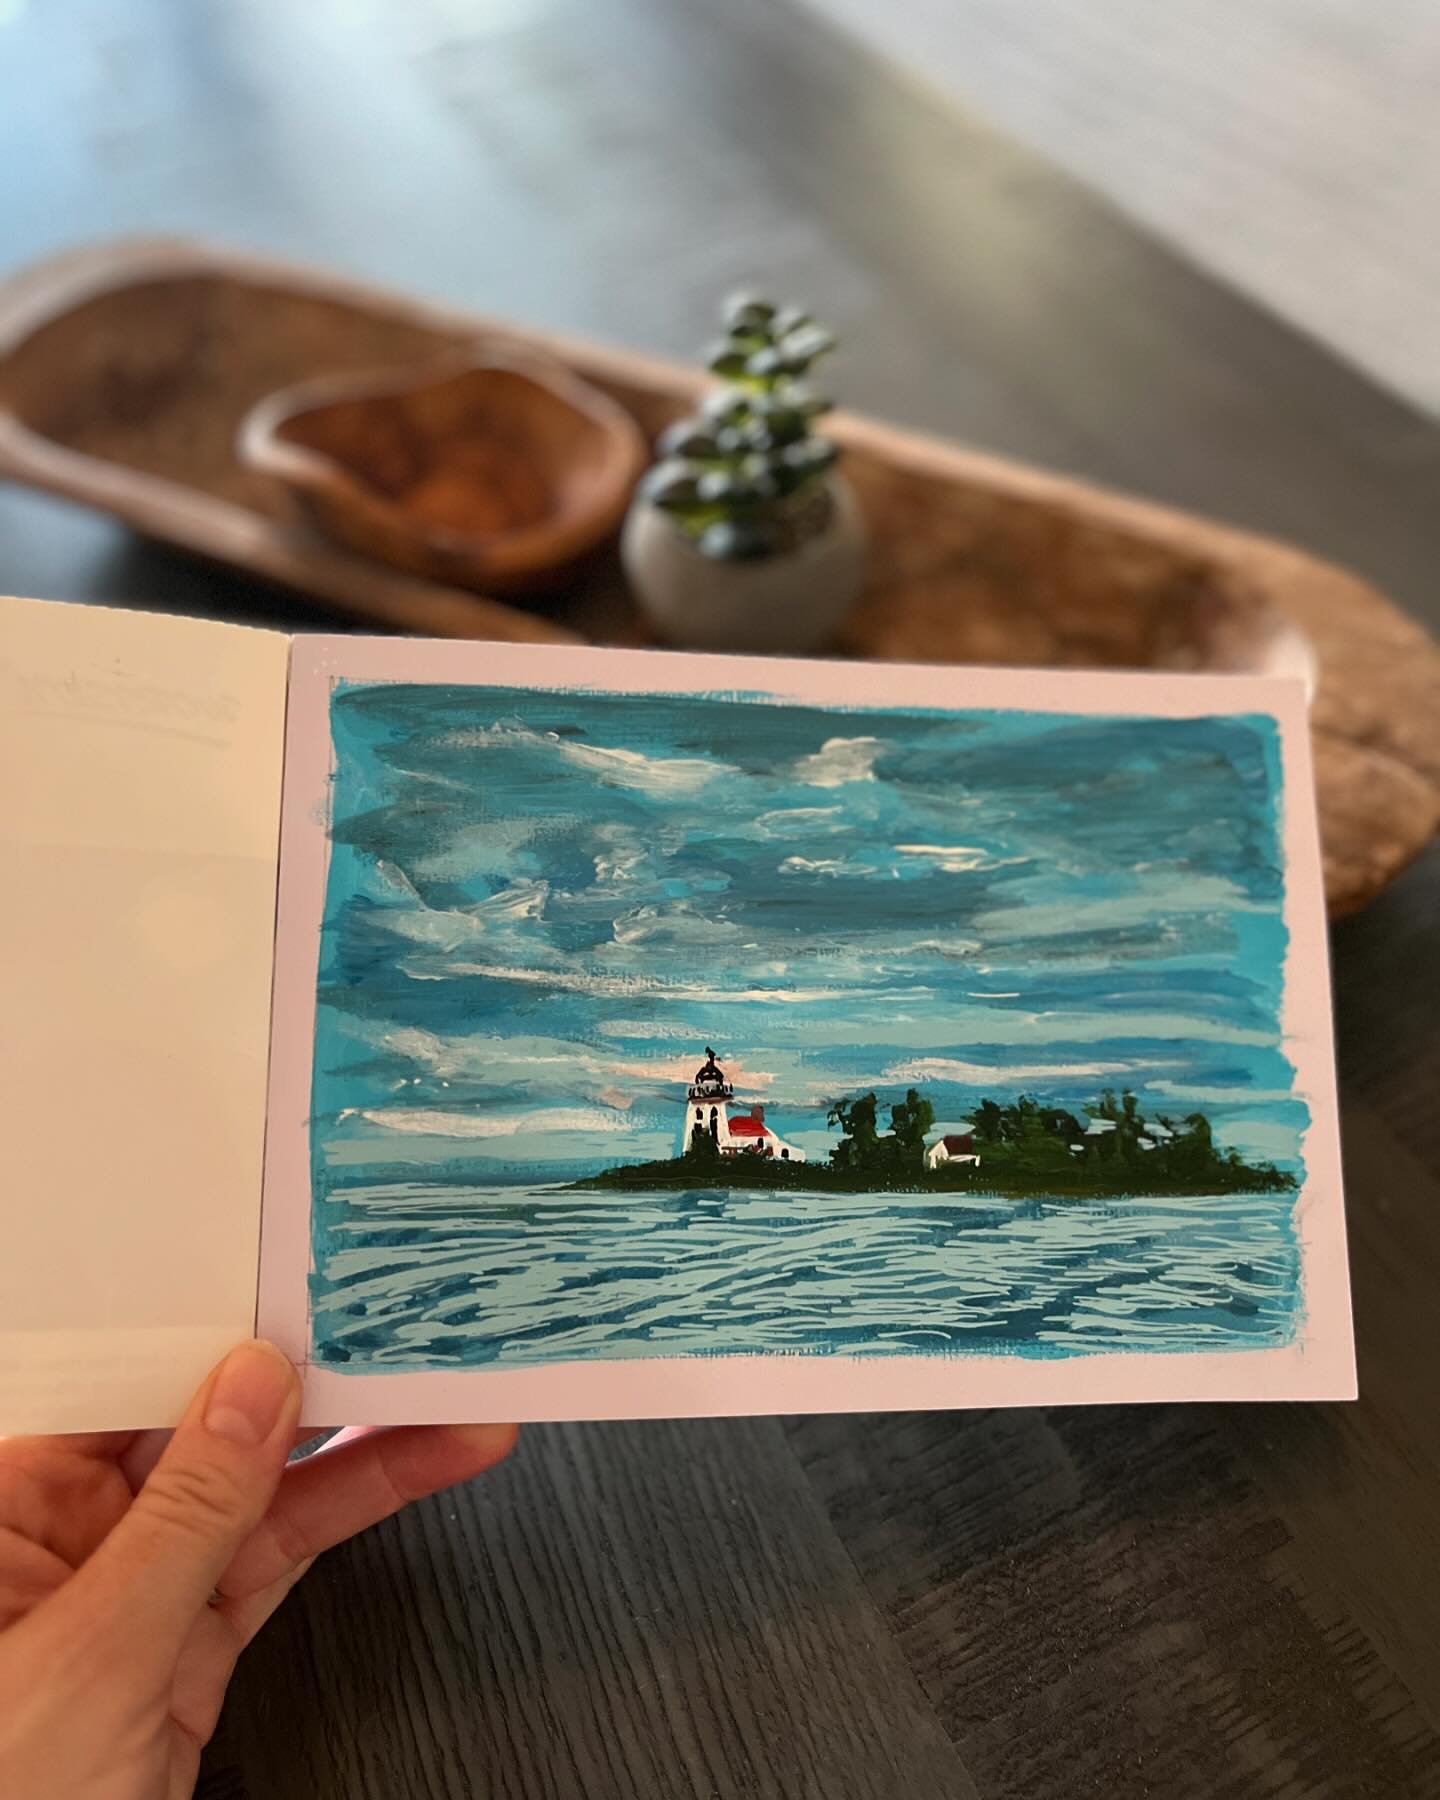 Day 86 of the #100dayproject and this paint sketch is of a lighthouse we saw on our boat tour with @northchannelcruiseline when we went to Killarney.